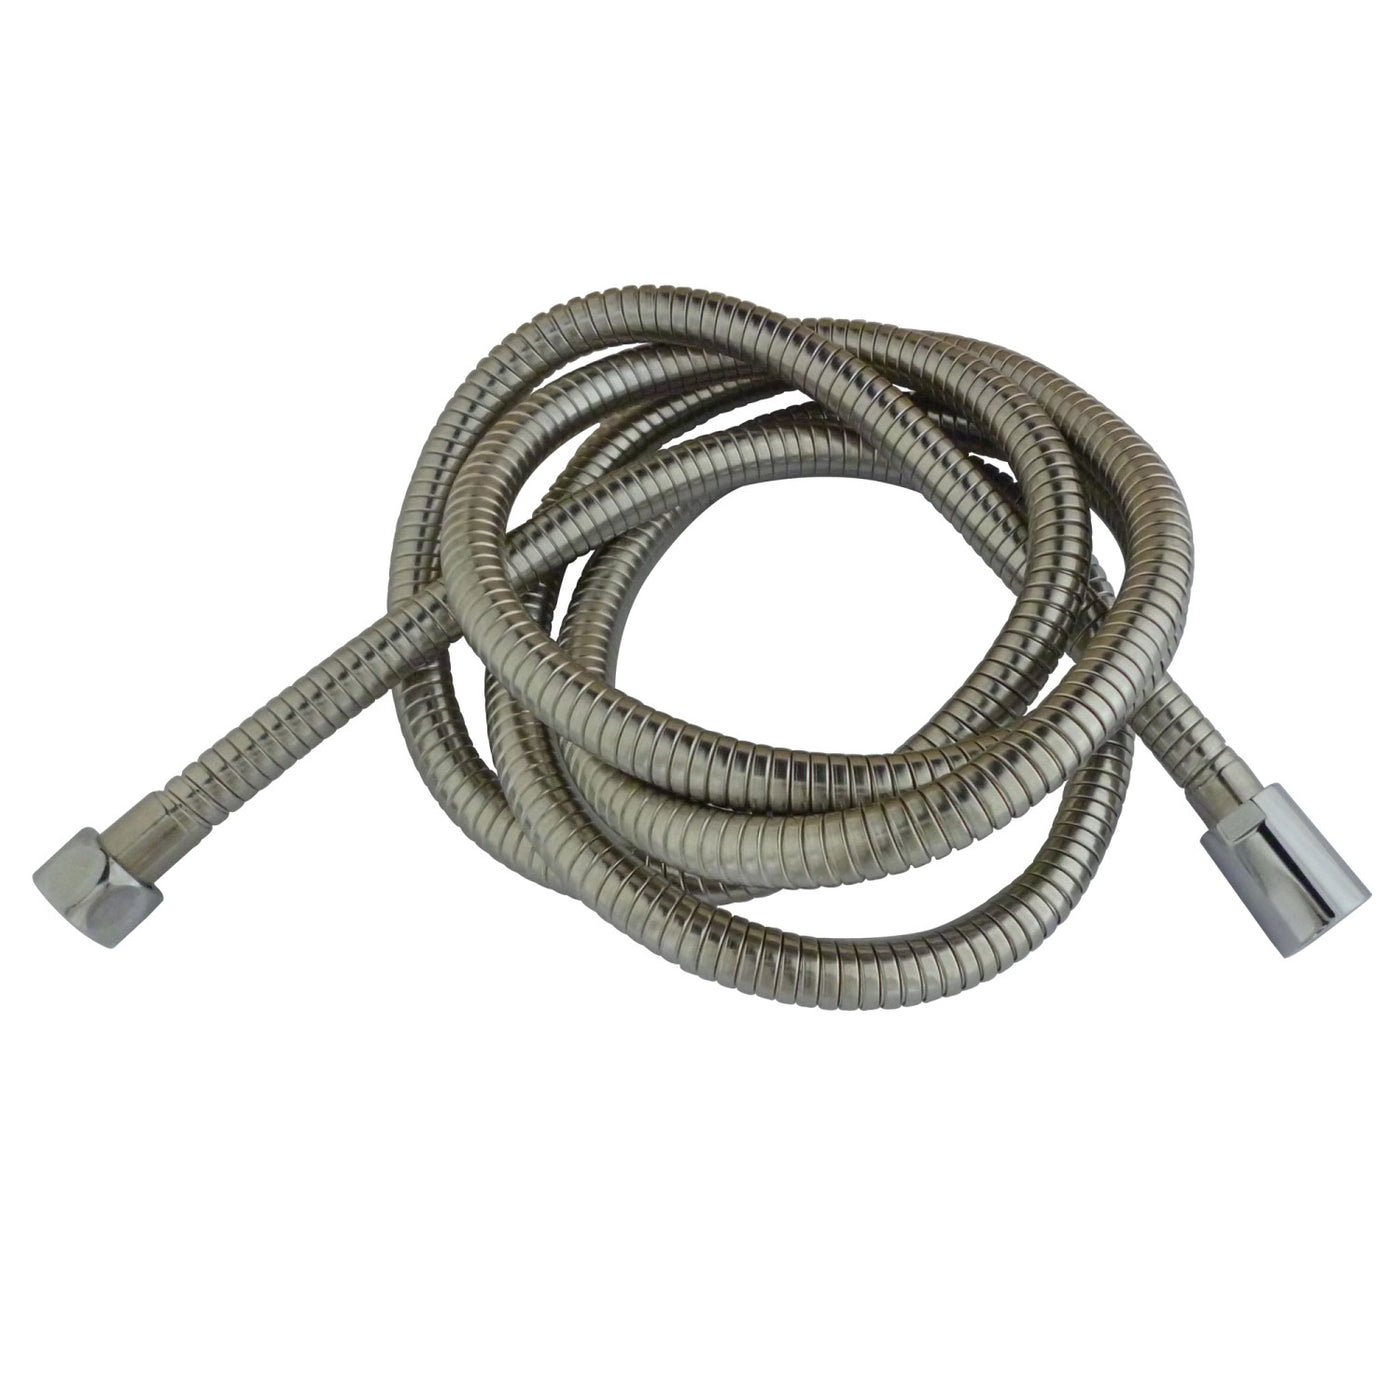 Elements of Design EDH696CRI 63-78.75" Double Spiral Stainless Steel Hose, Stainless Steel